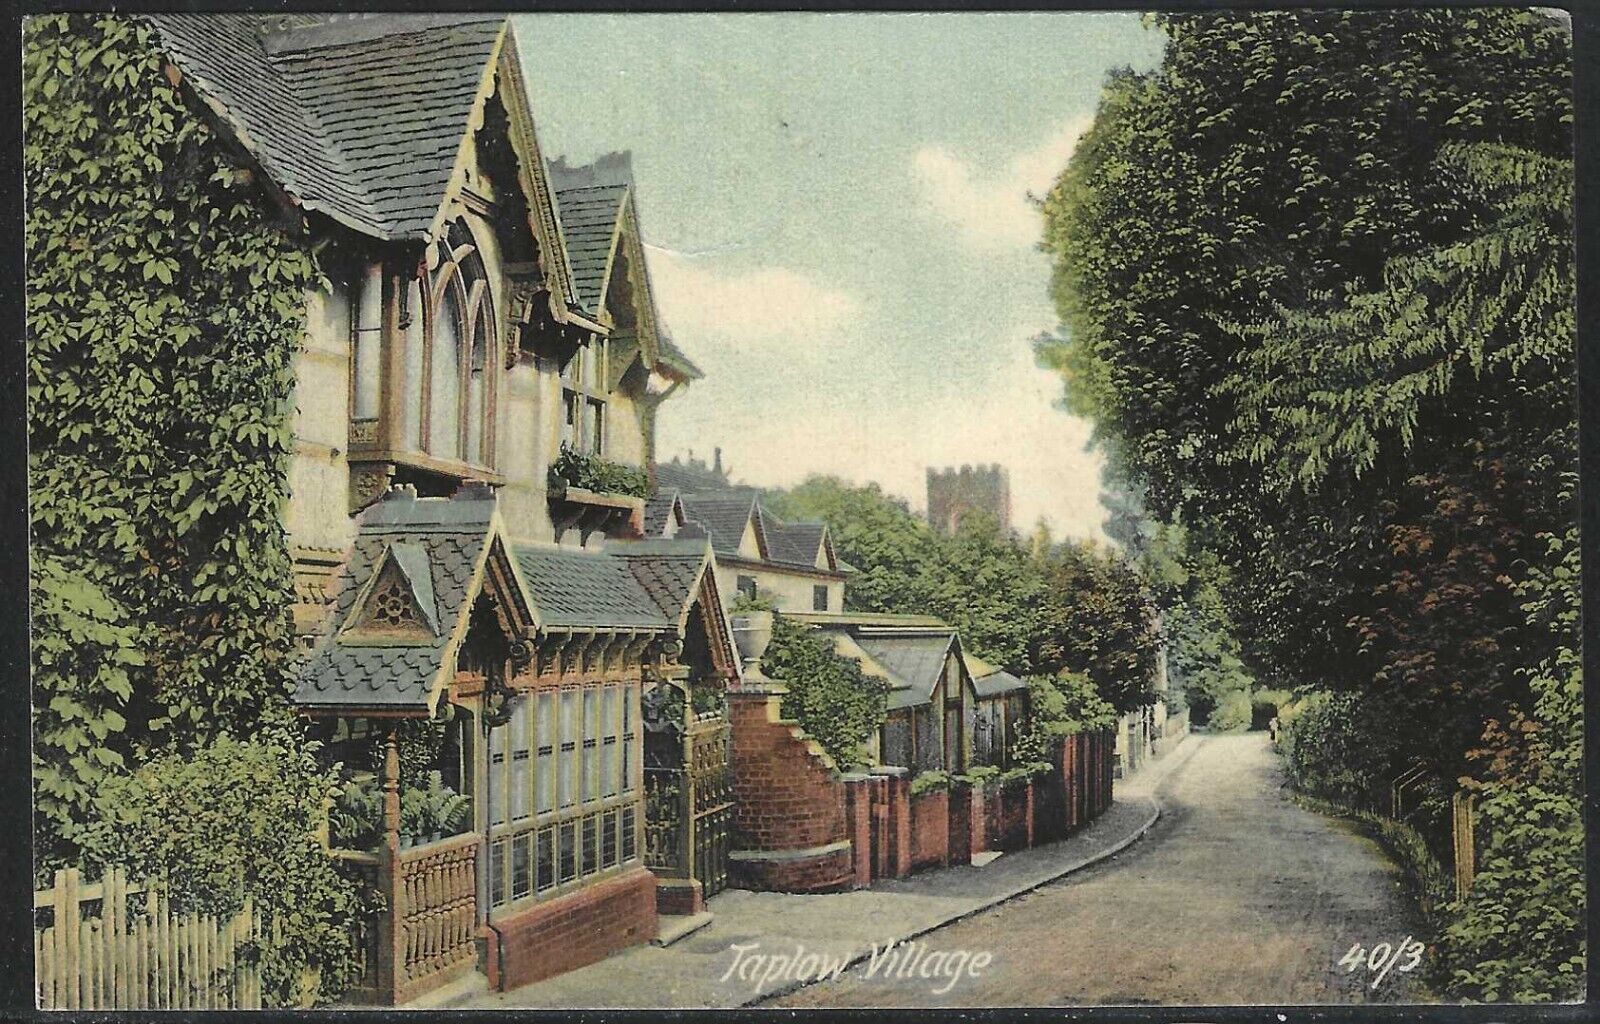 View of Taplow Village, England, Great Britain, 1906 Postcard, Used